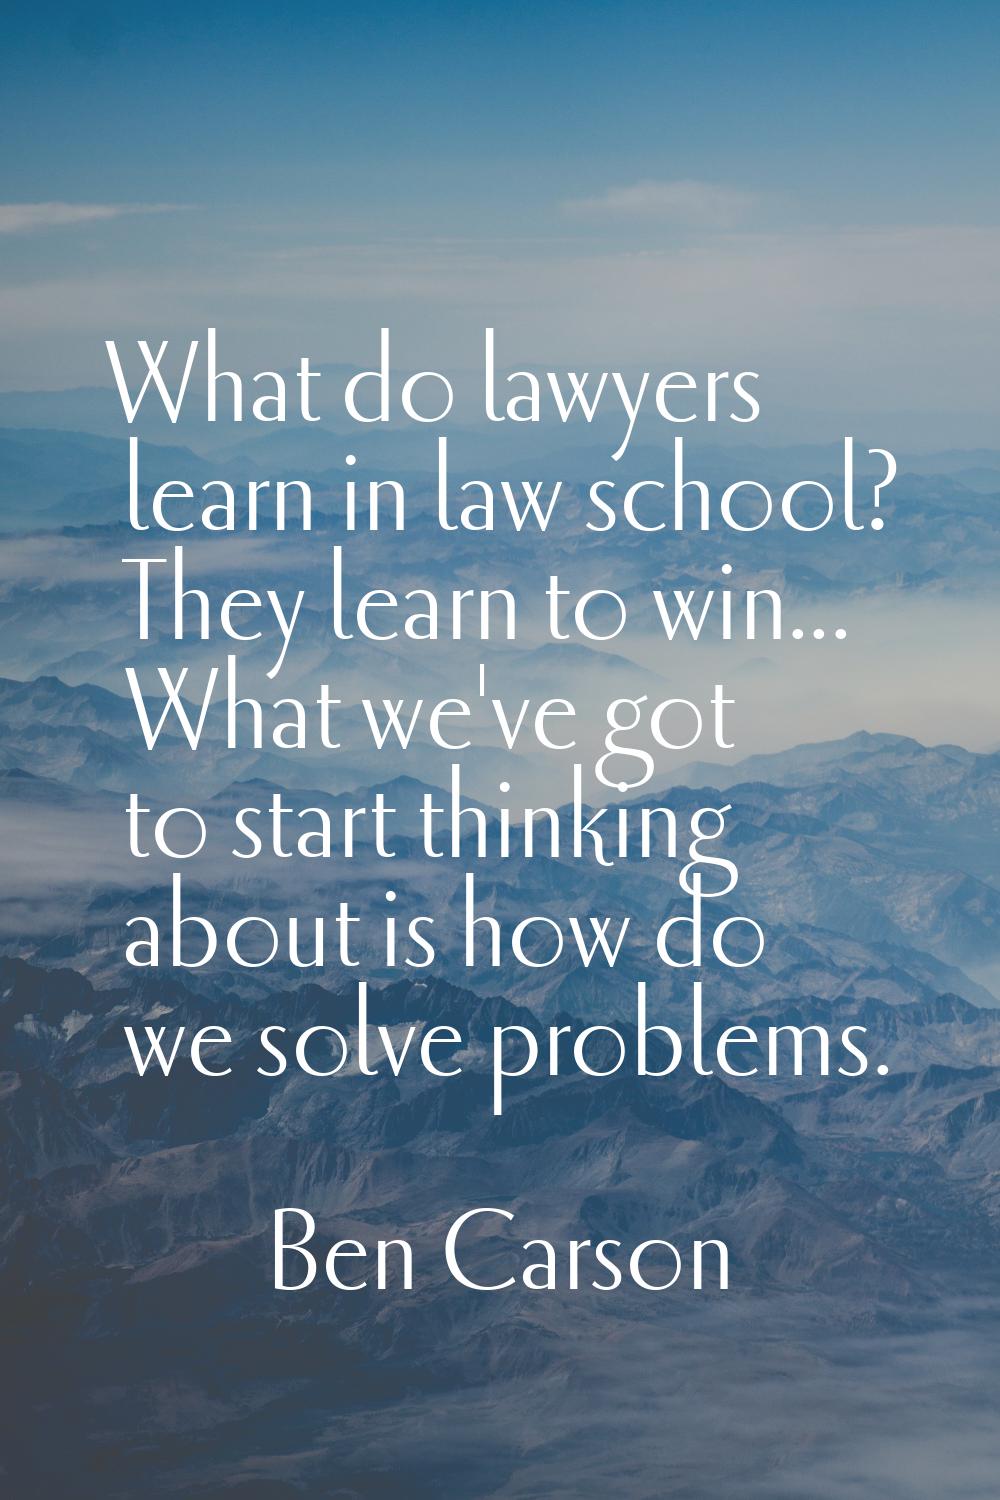 What do lawyers learn in law school? They learn to win... What we've got to start thinking about is